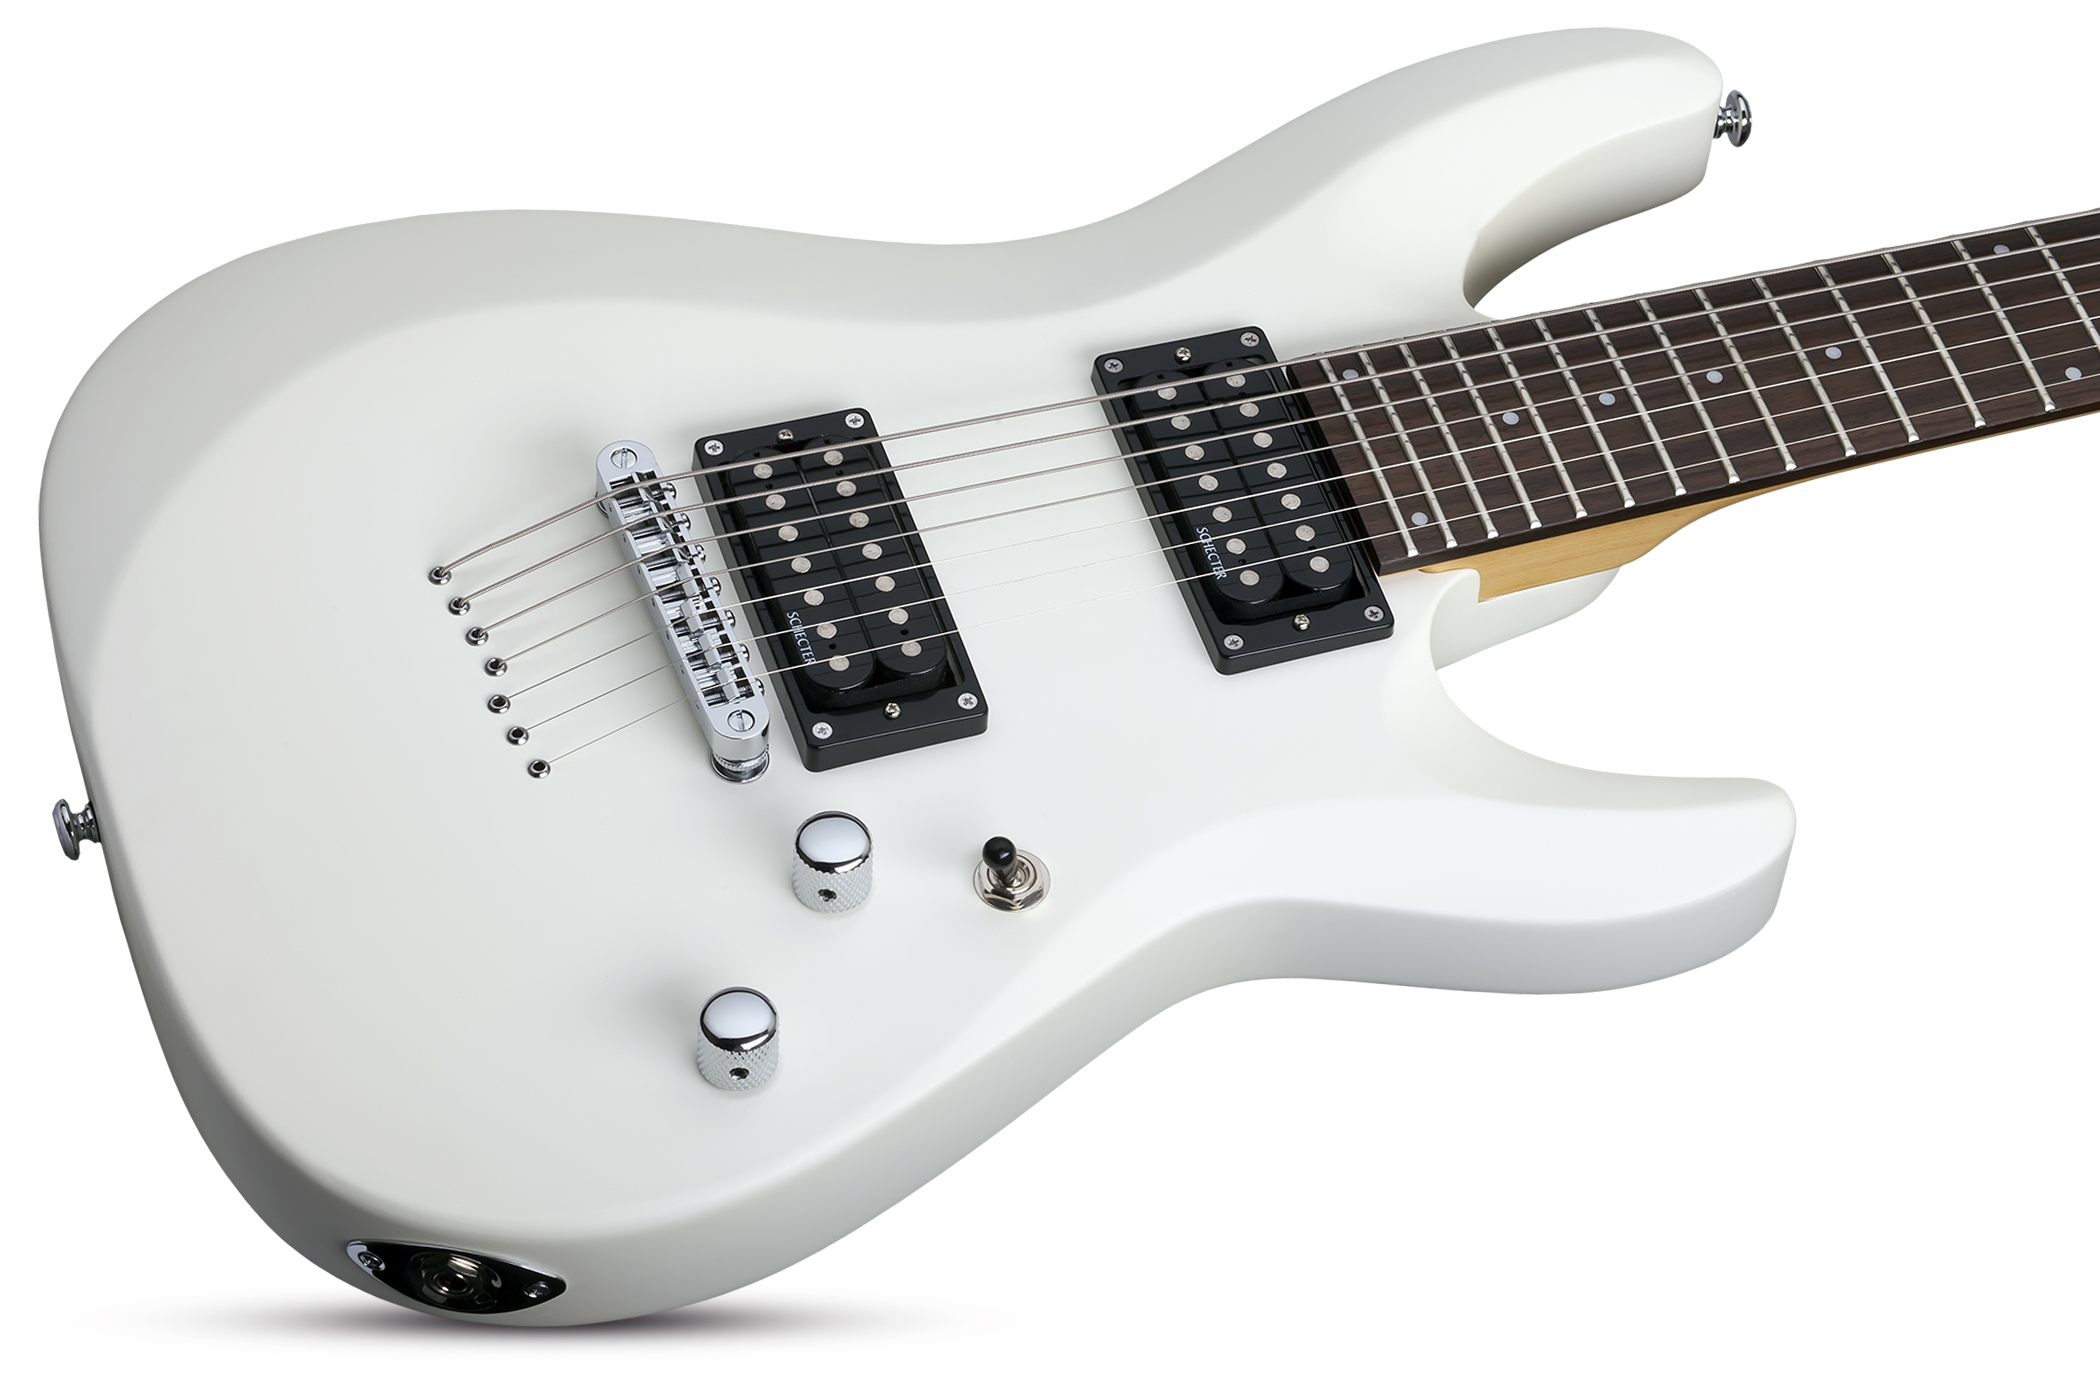 Schecter C-7 Deluxe 7c 2h Ht Rw - Satin White - 7 string electric guitar - Variation 1